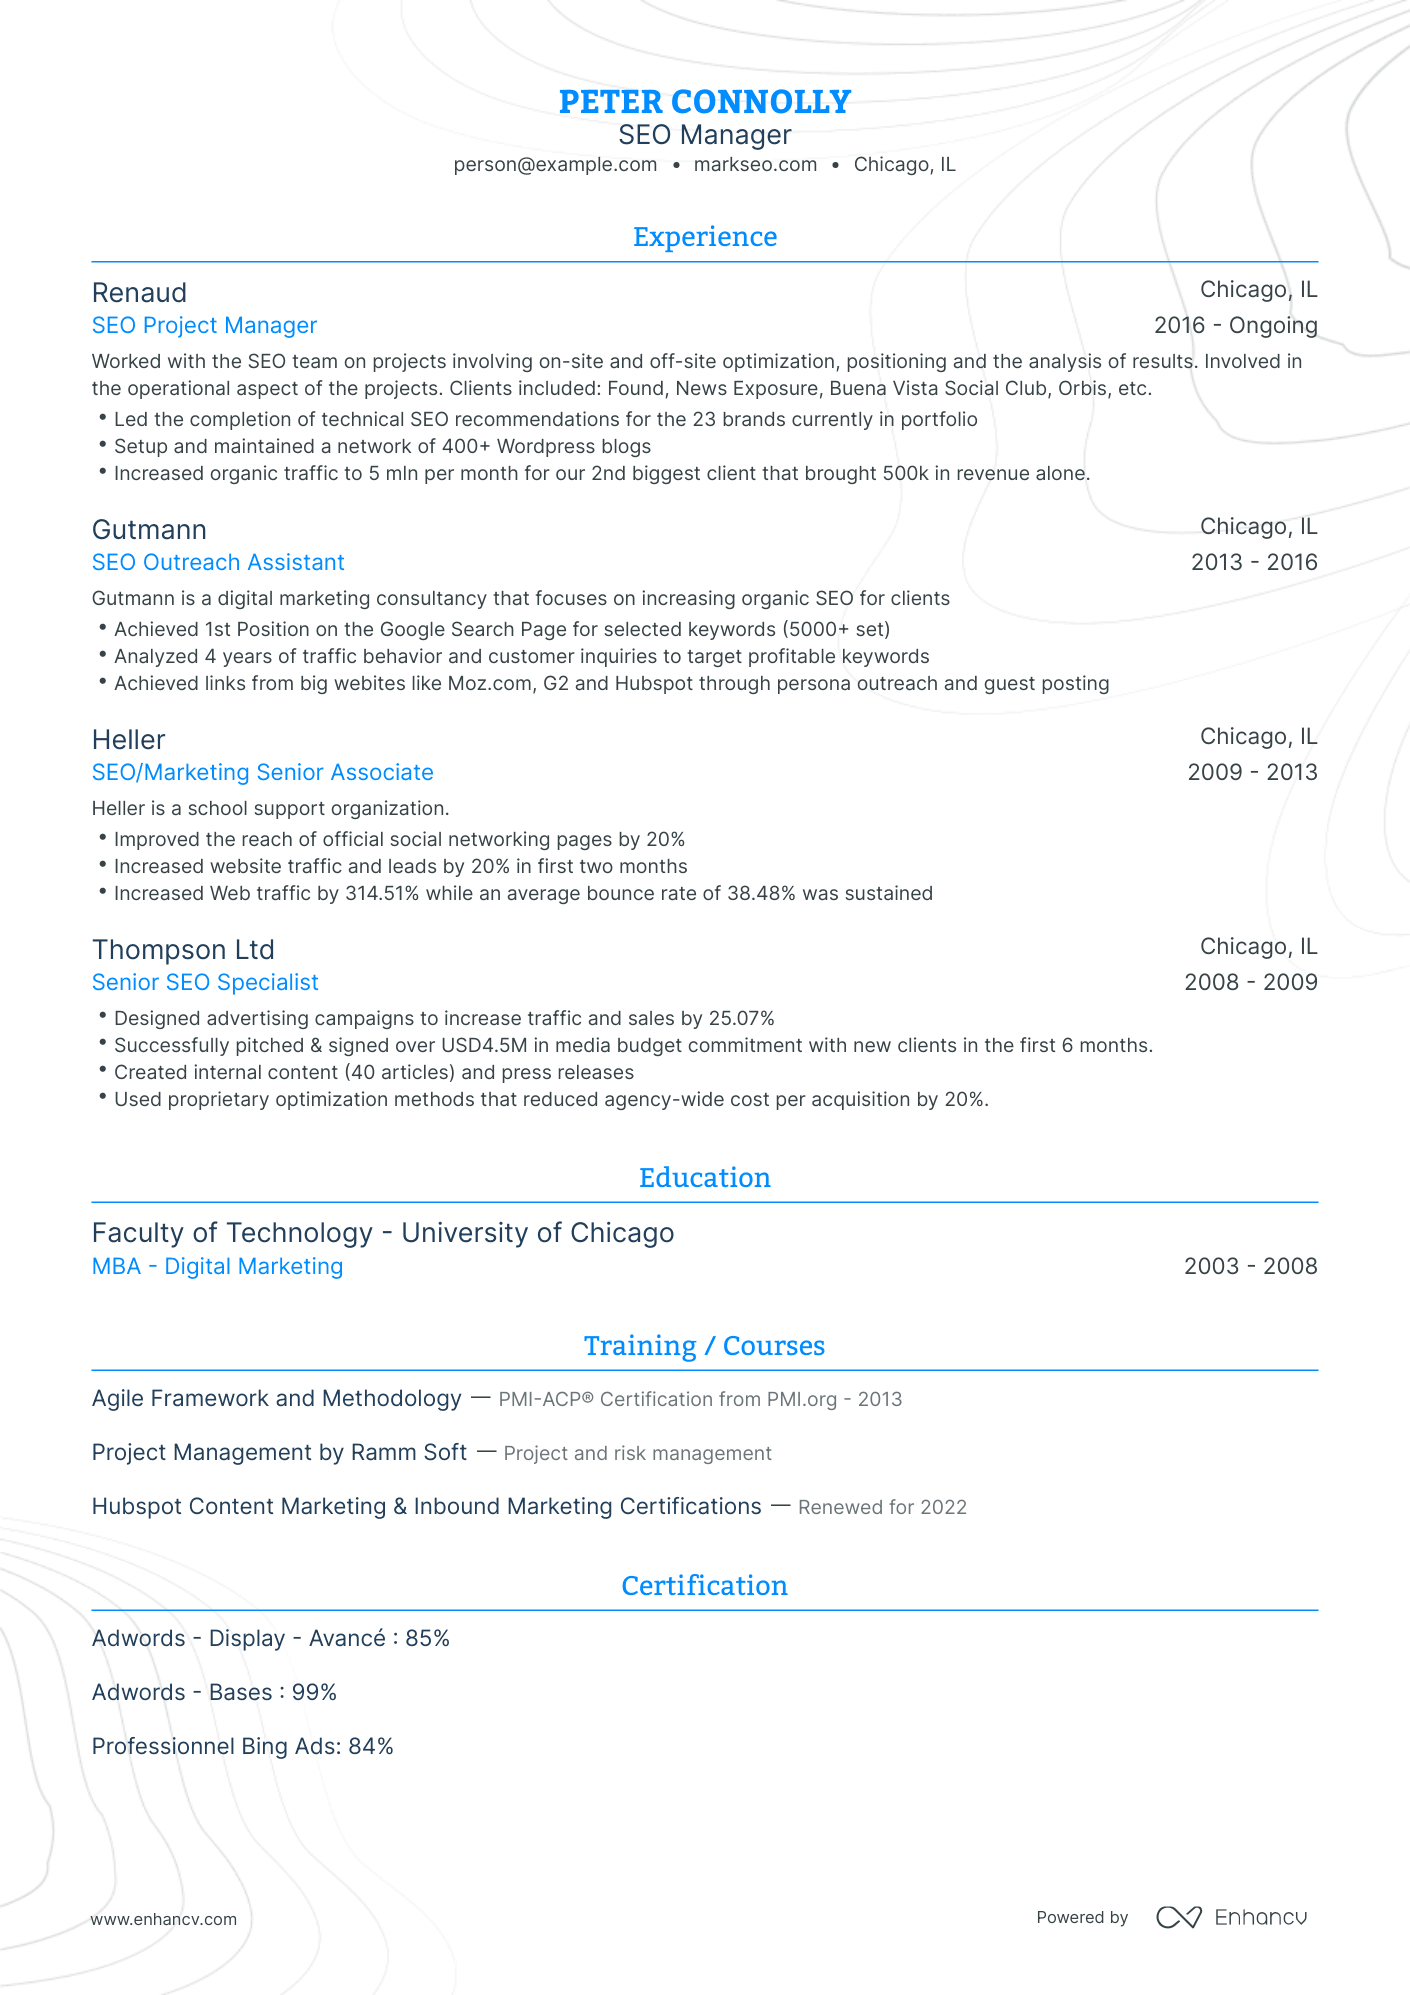 Traditional SEO Manager Resume Template